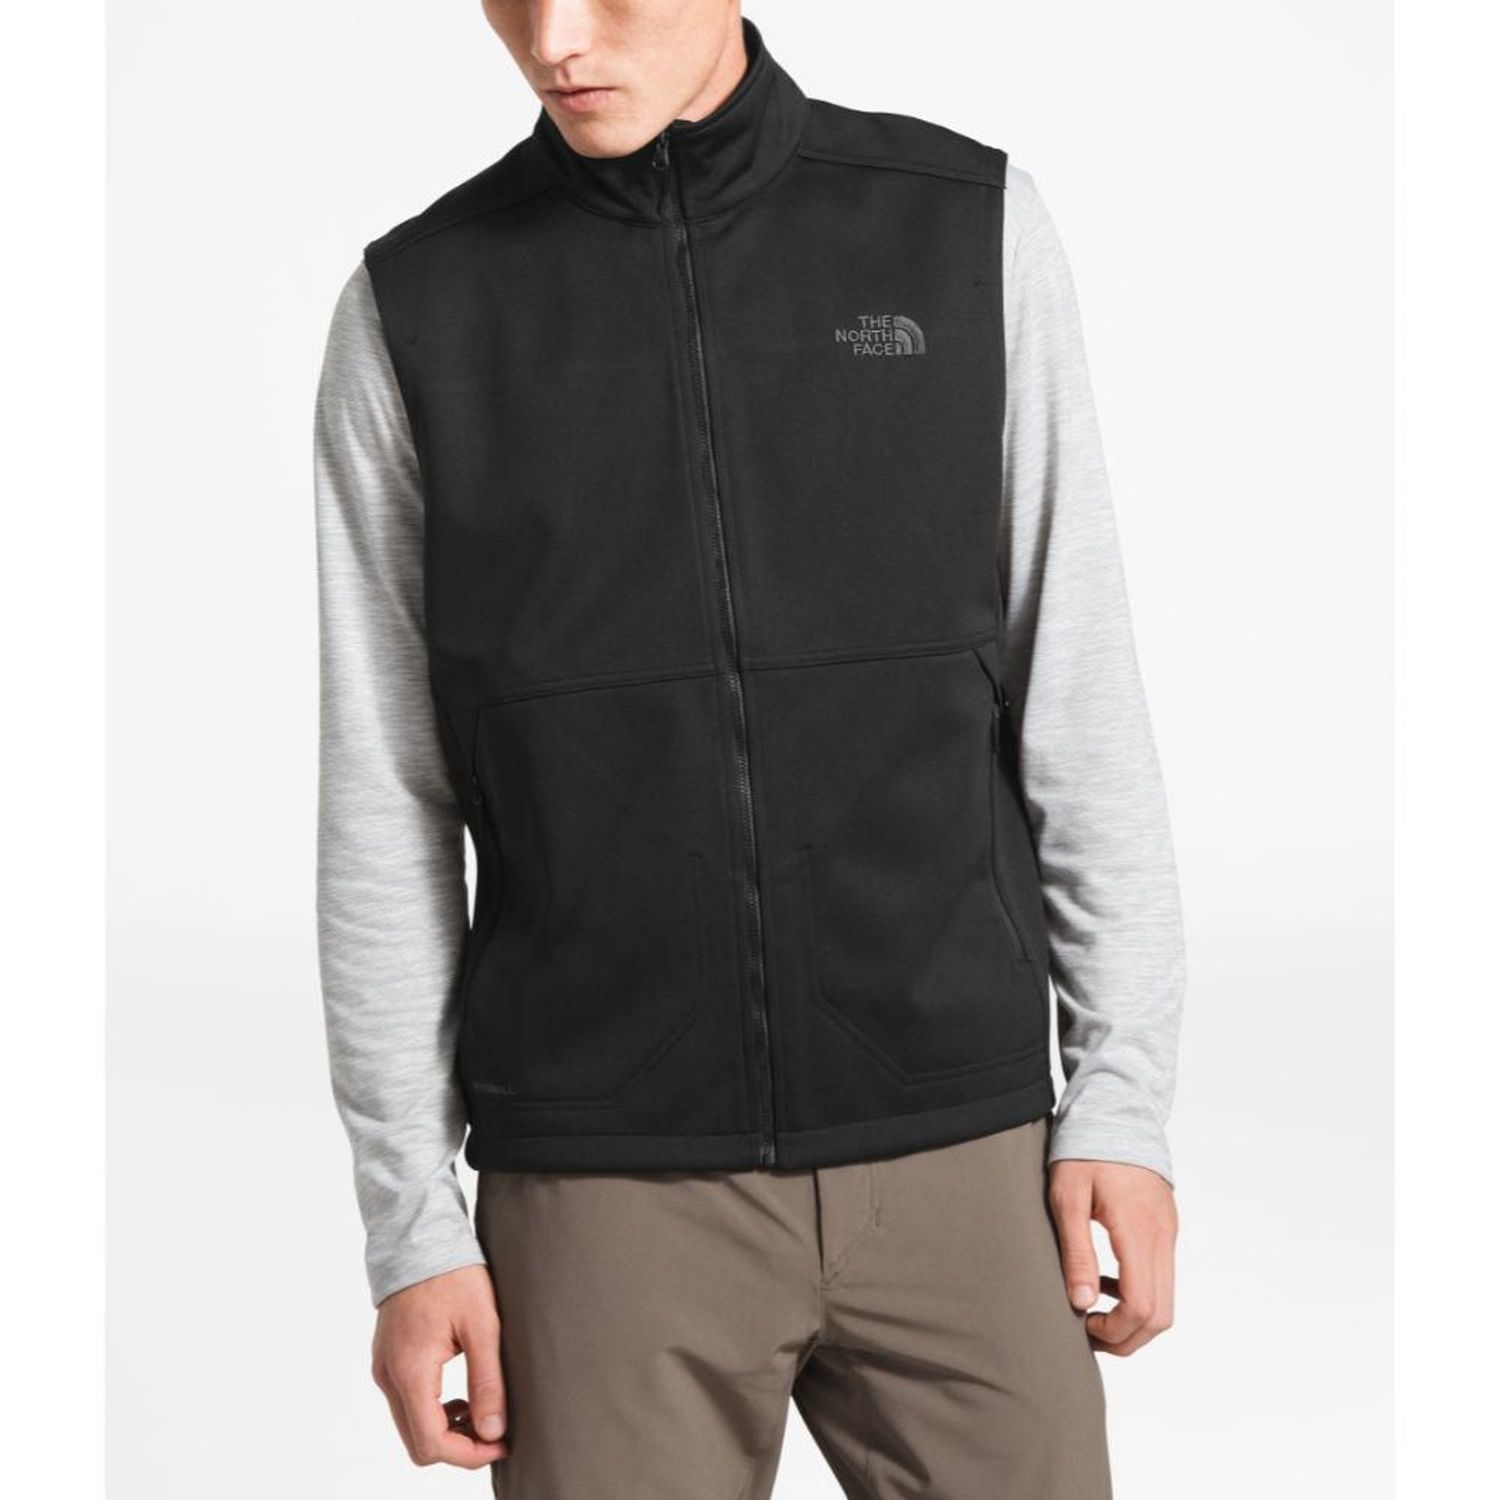 Chaleco The North Face Hombre M Apex Canyonwall Vest Negro Oechsle Oechsle 8645